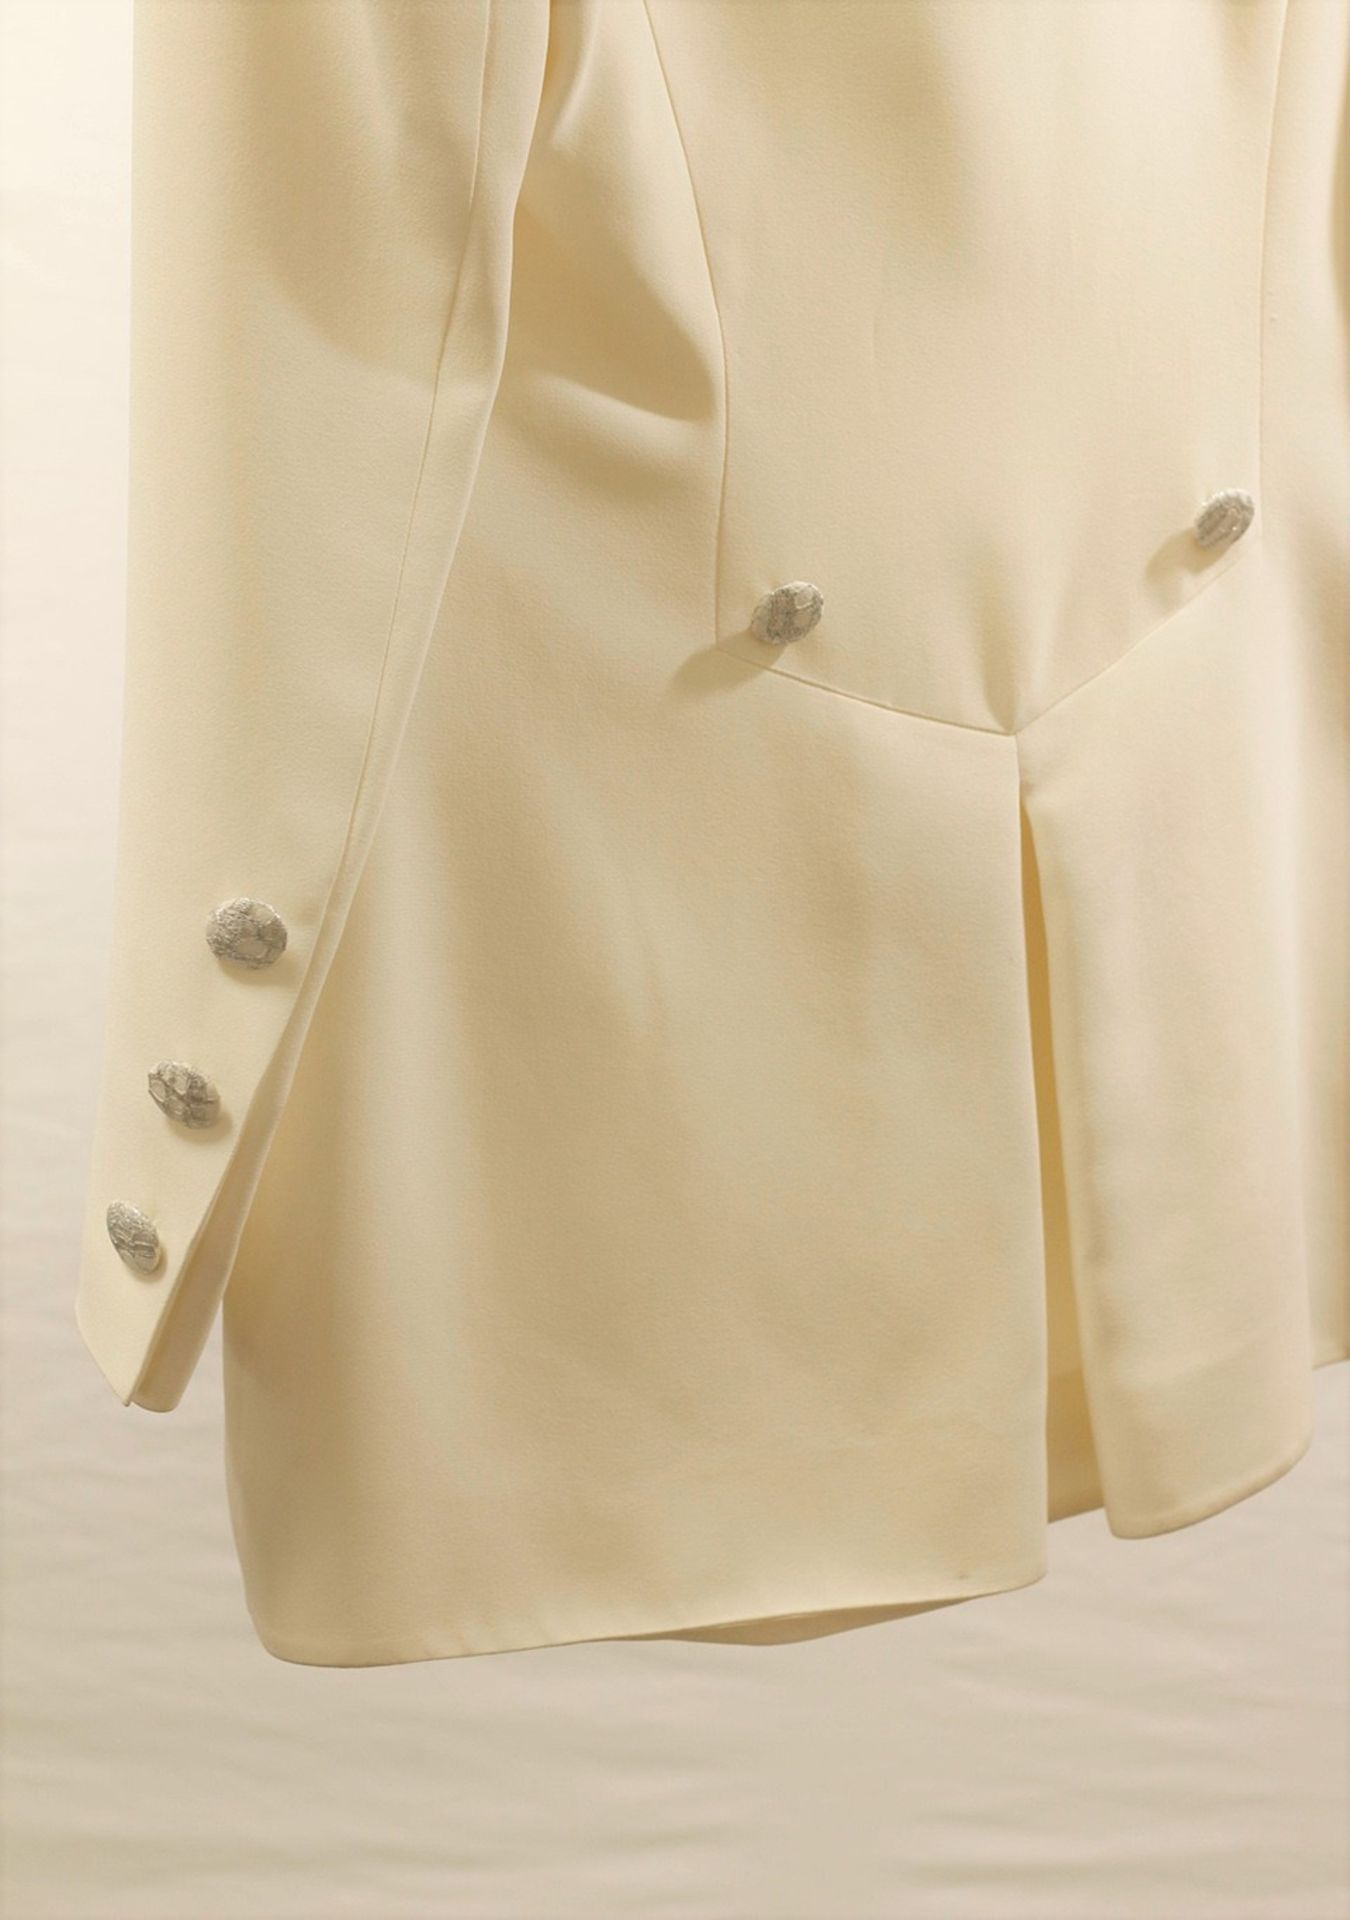 1 x Boutique Le Duc Cream Jacket - Size: 16 - Material: 52% Viscose, 48% Acetate - From a High End - Image 16 of 17